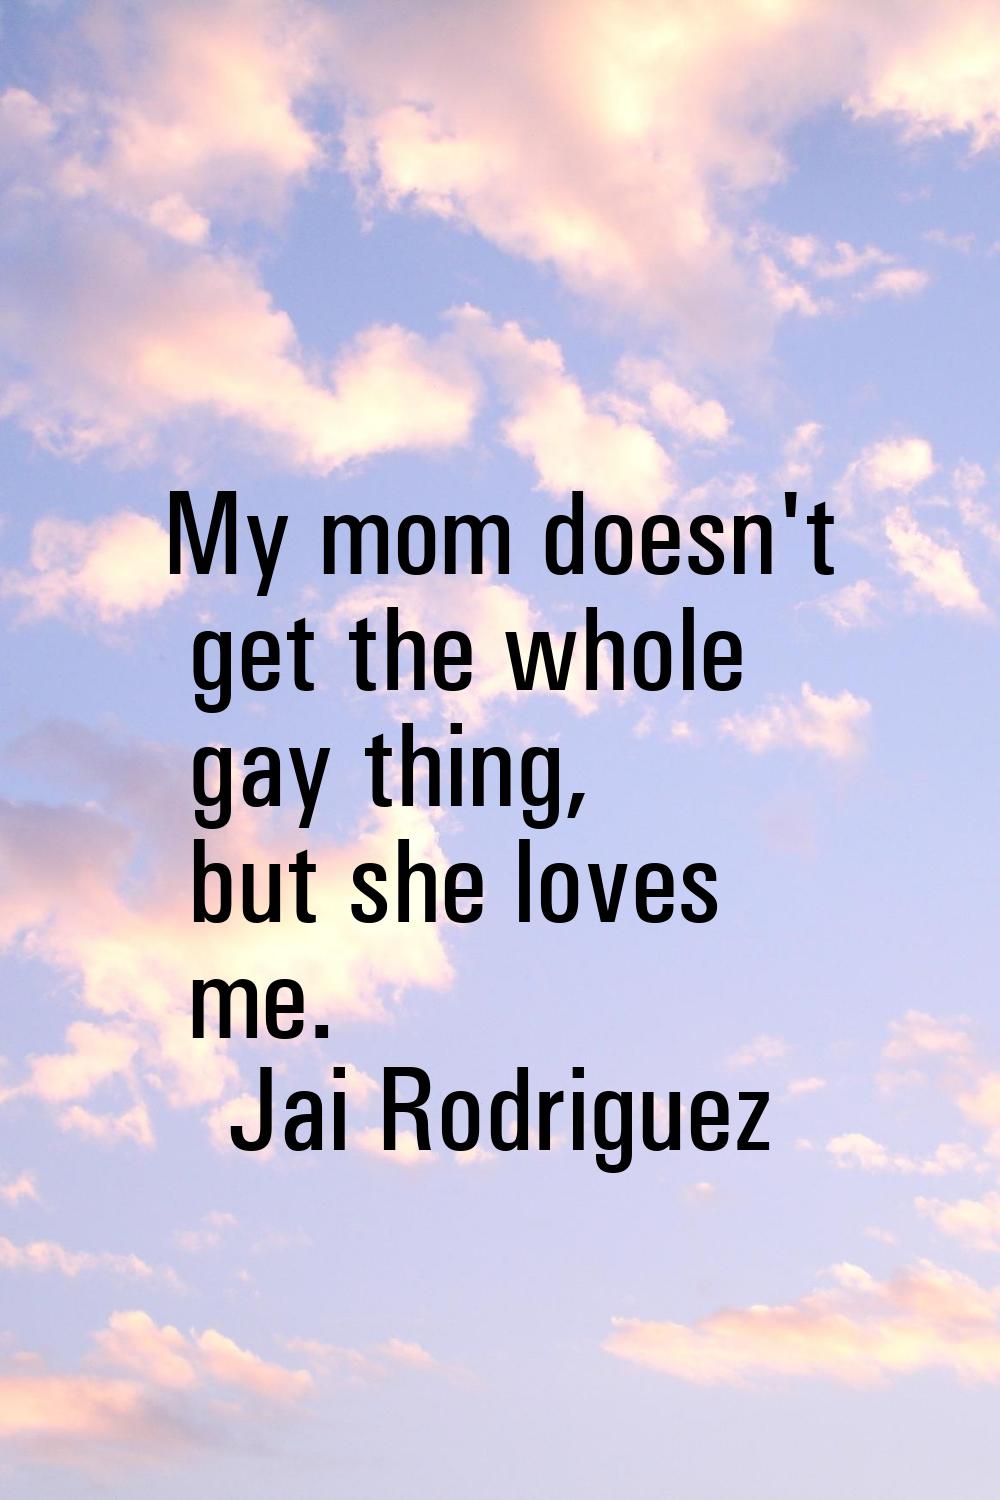 My mom doesn't get the whole gay thing, but she loves me.